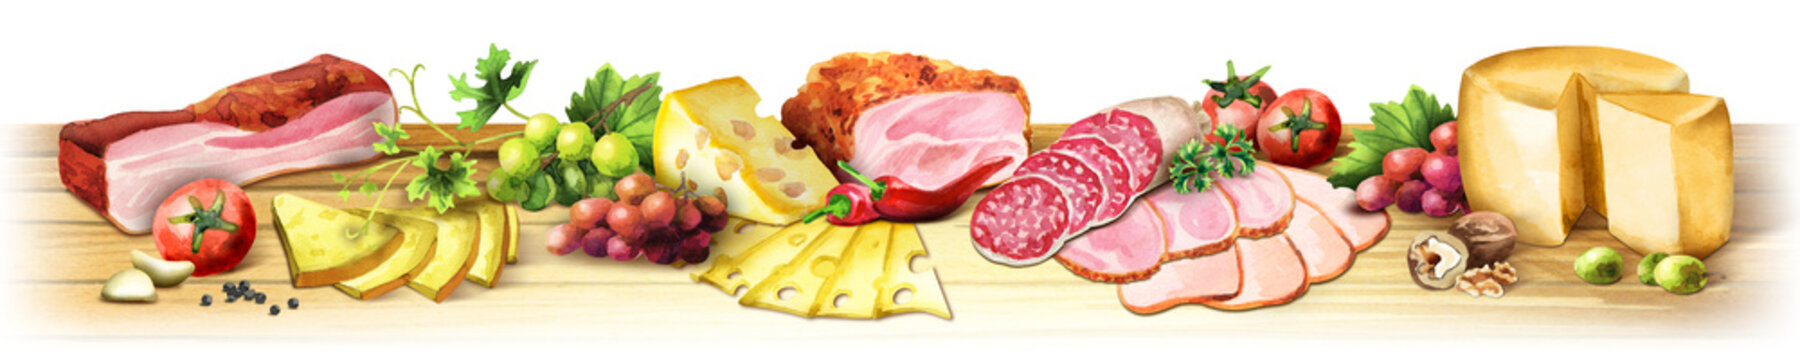 Panoramic image of smoked meat, sausages and cheese on a white background. Can be used for kitchen skinali. Watercolor